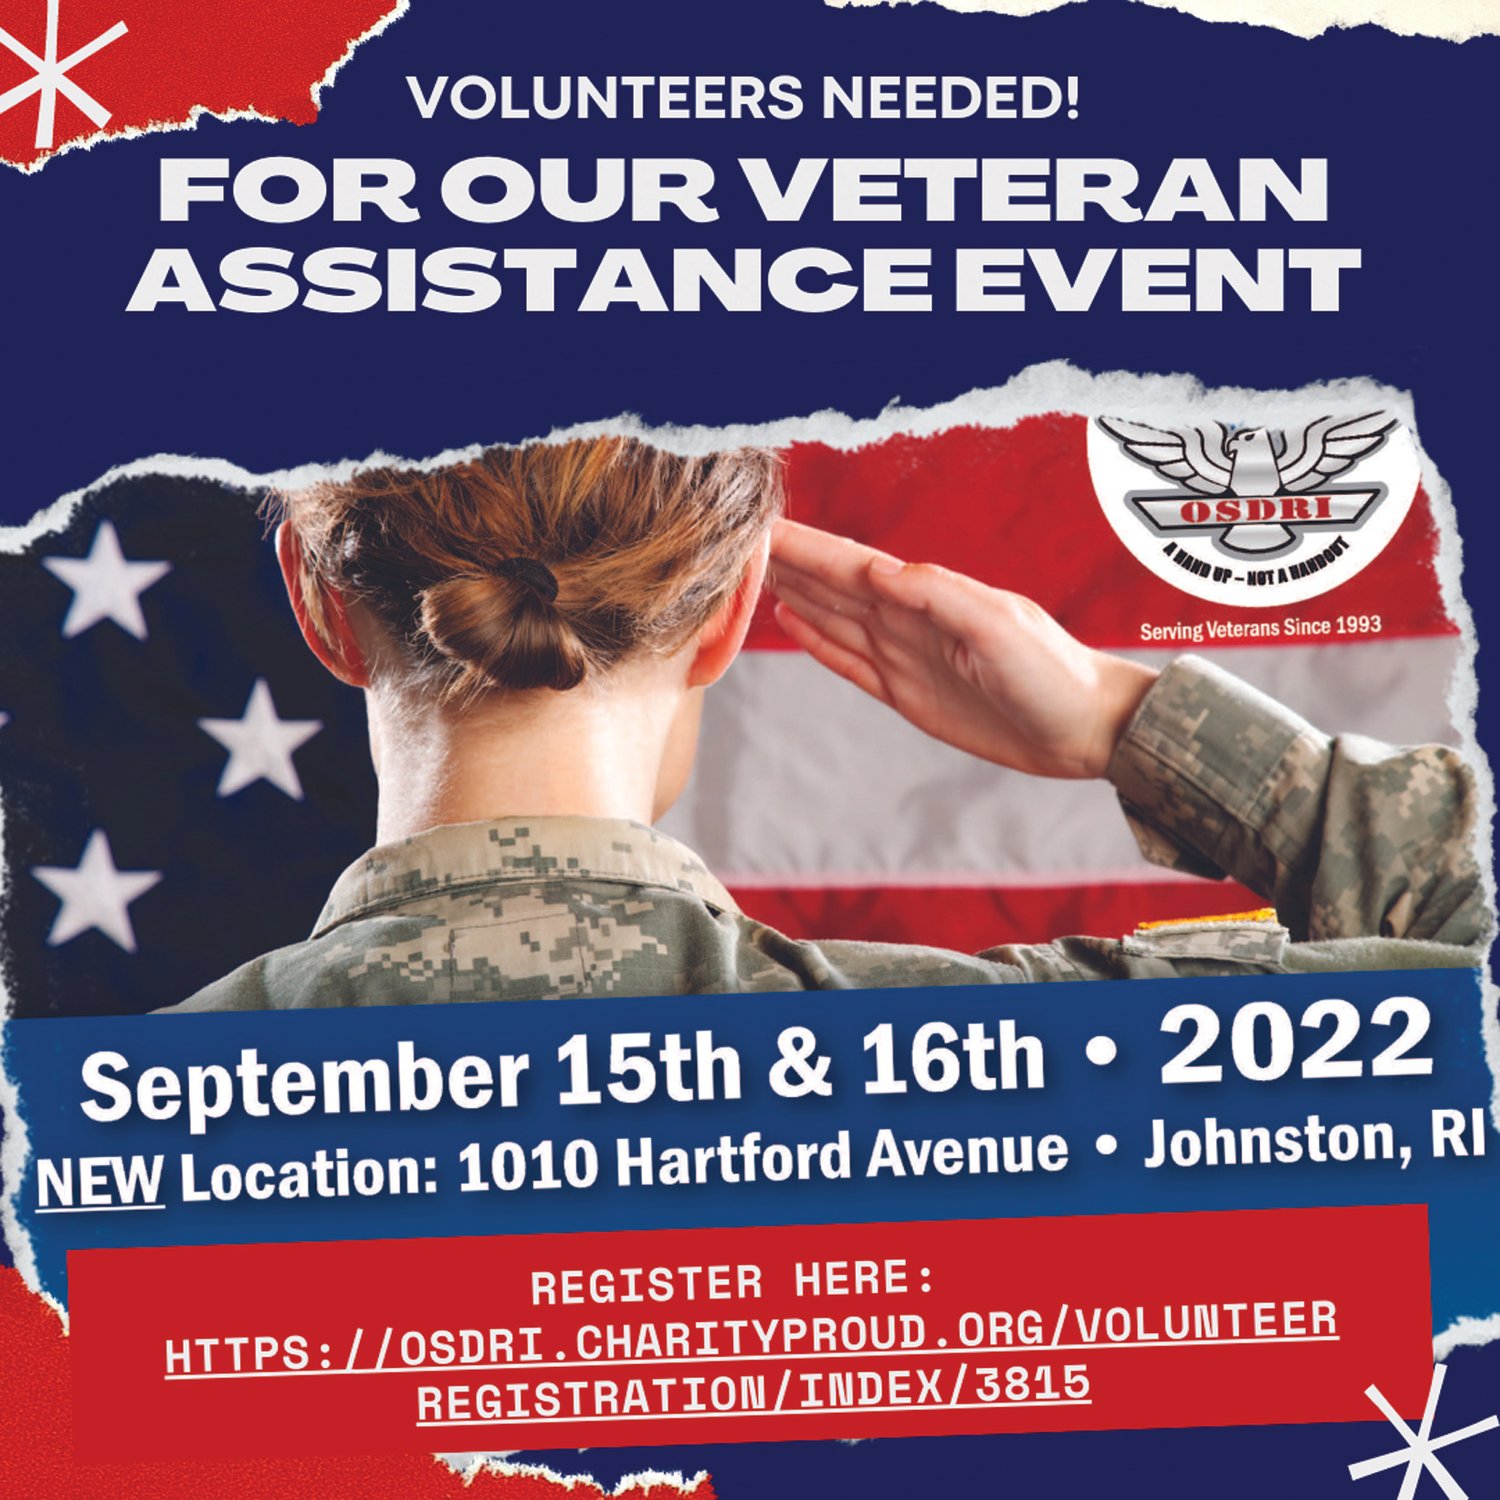 OSDRI needs volunteers for a number of different roles for their Veteran Assistance Event on Sept. 15 and 16. If you have any questions please contact 401-383-4730 or osdri@osdri.org.